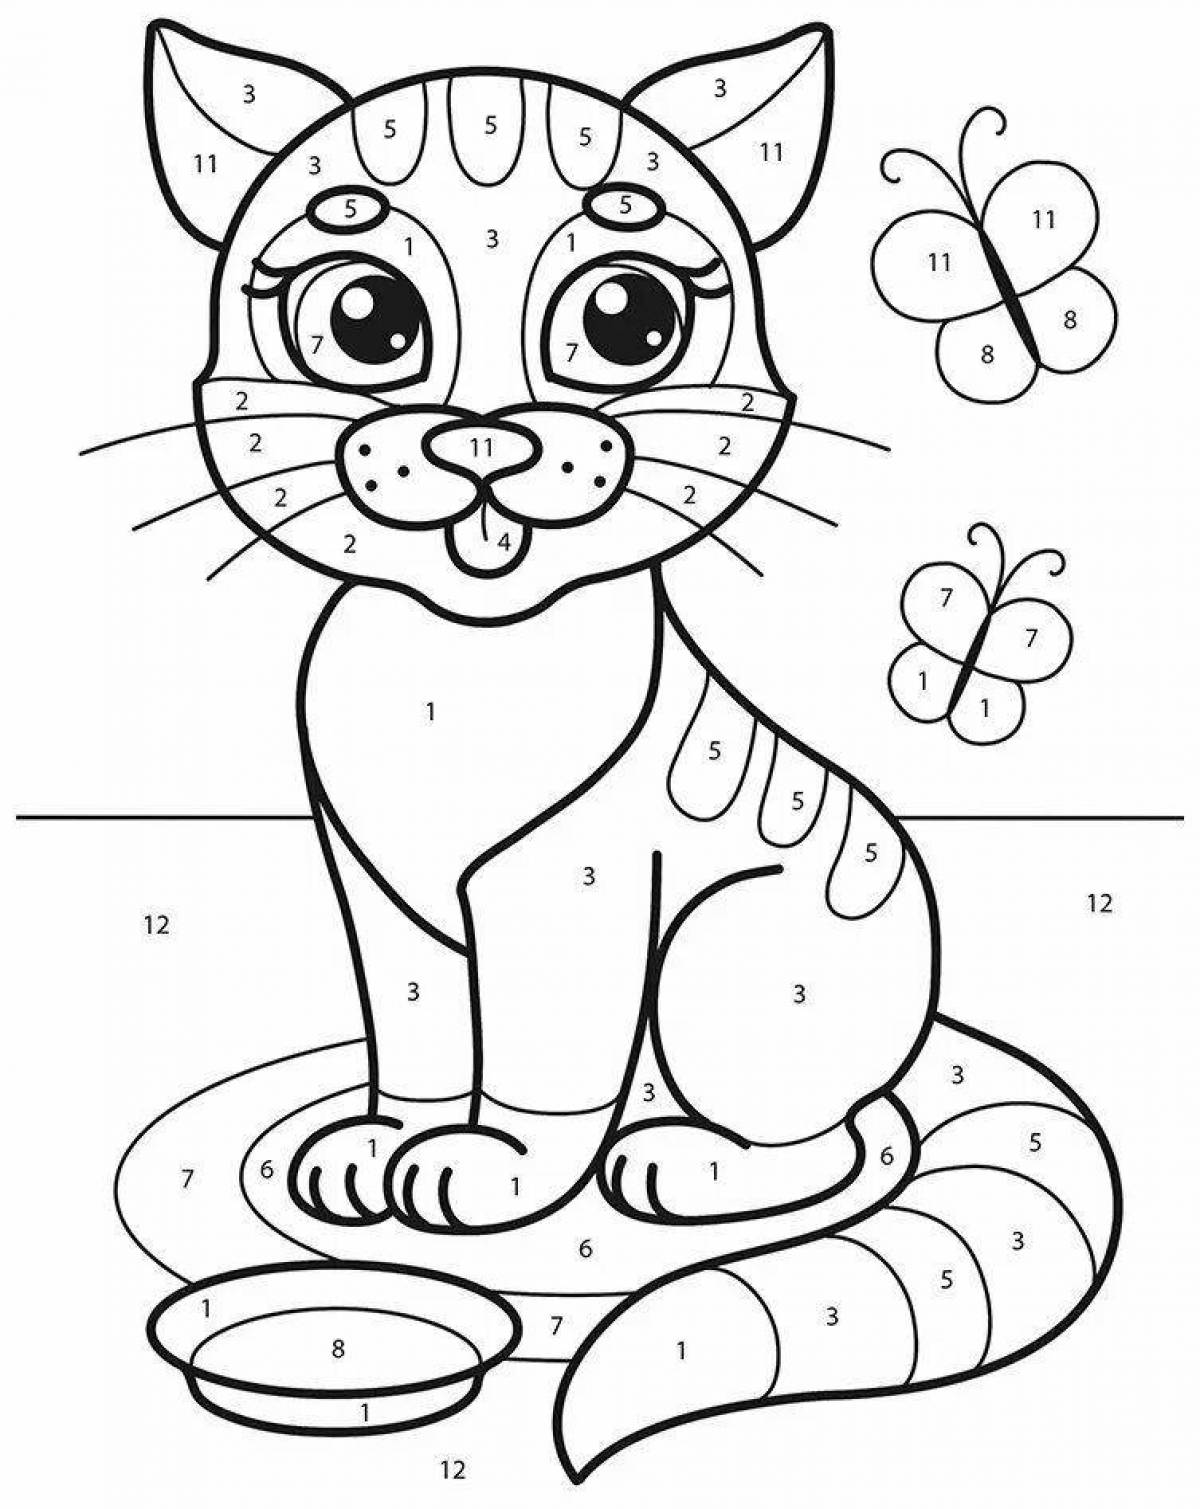 Colourful cat coloring by numbers